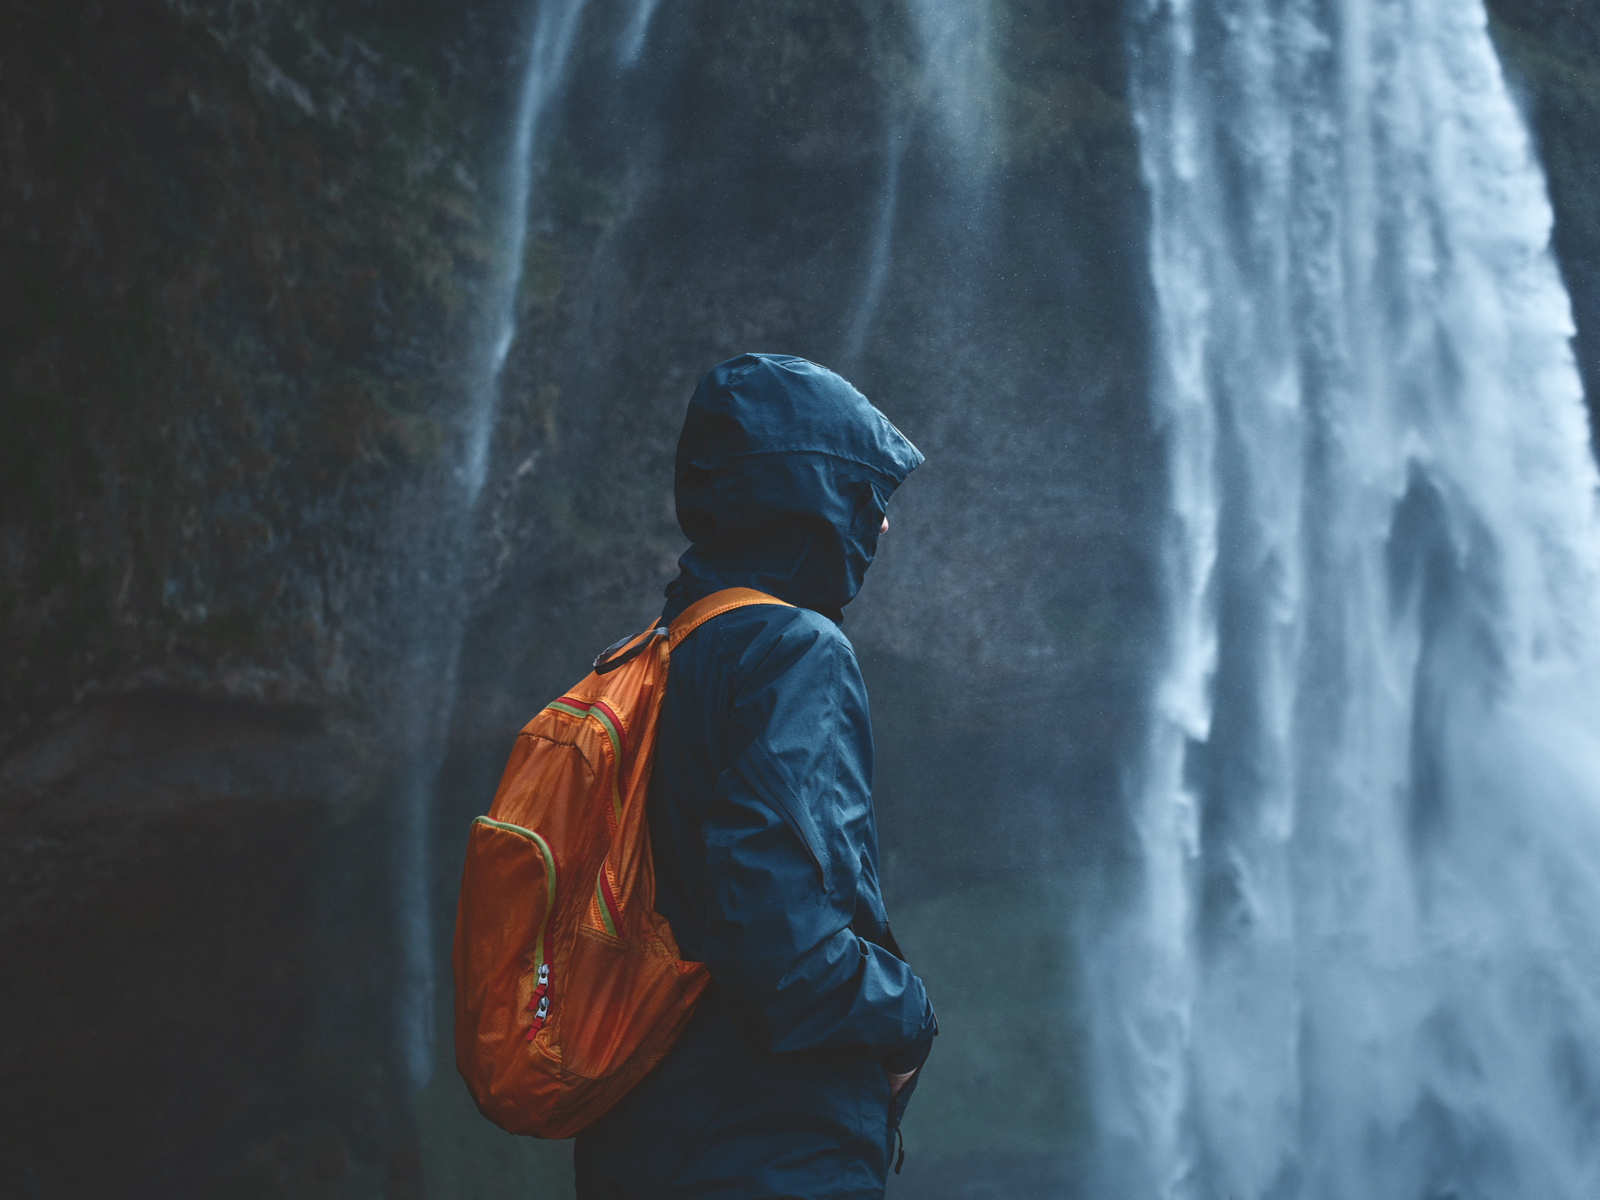 Hooded figure standing in front of a waterfall on a rainy day wearing the best waterproof backpack